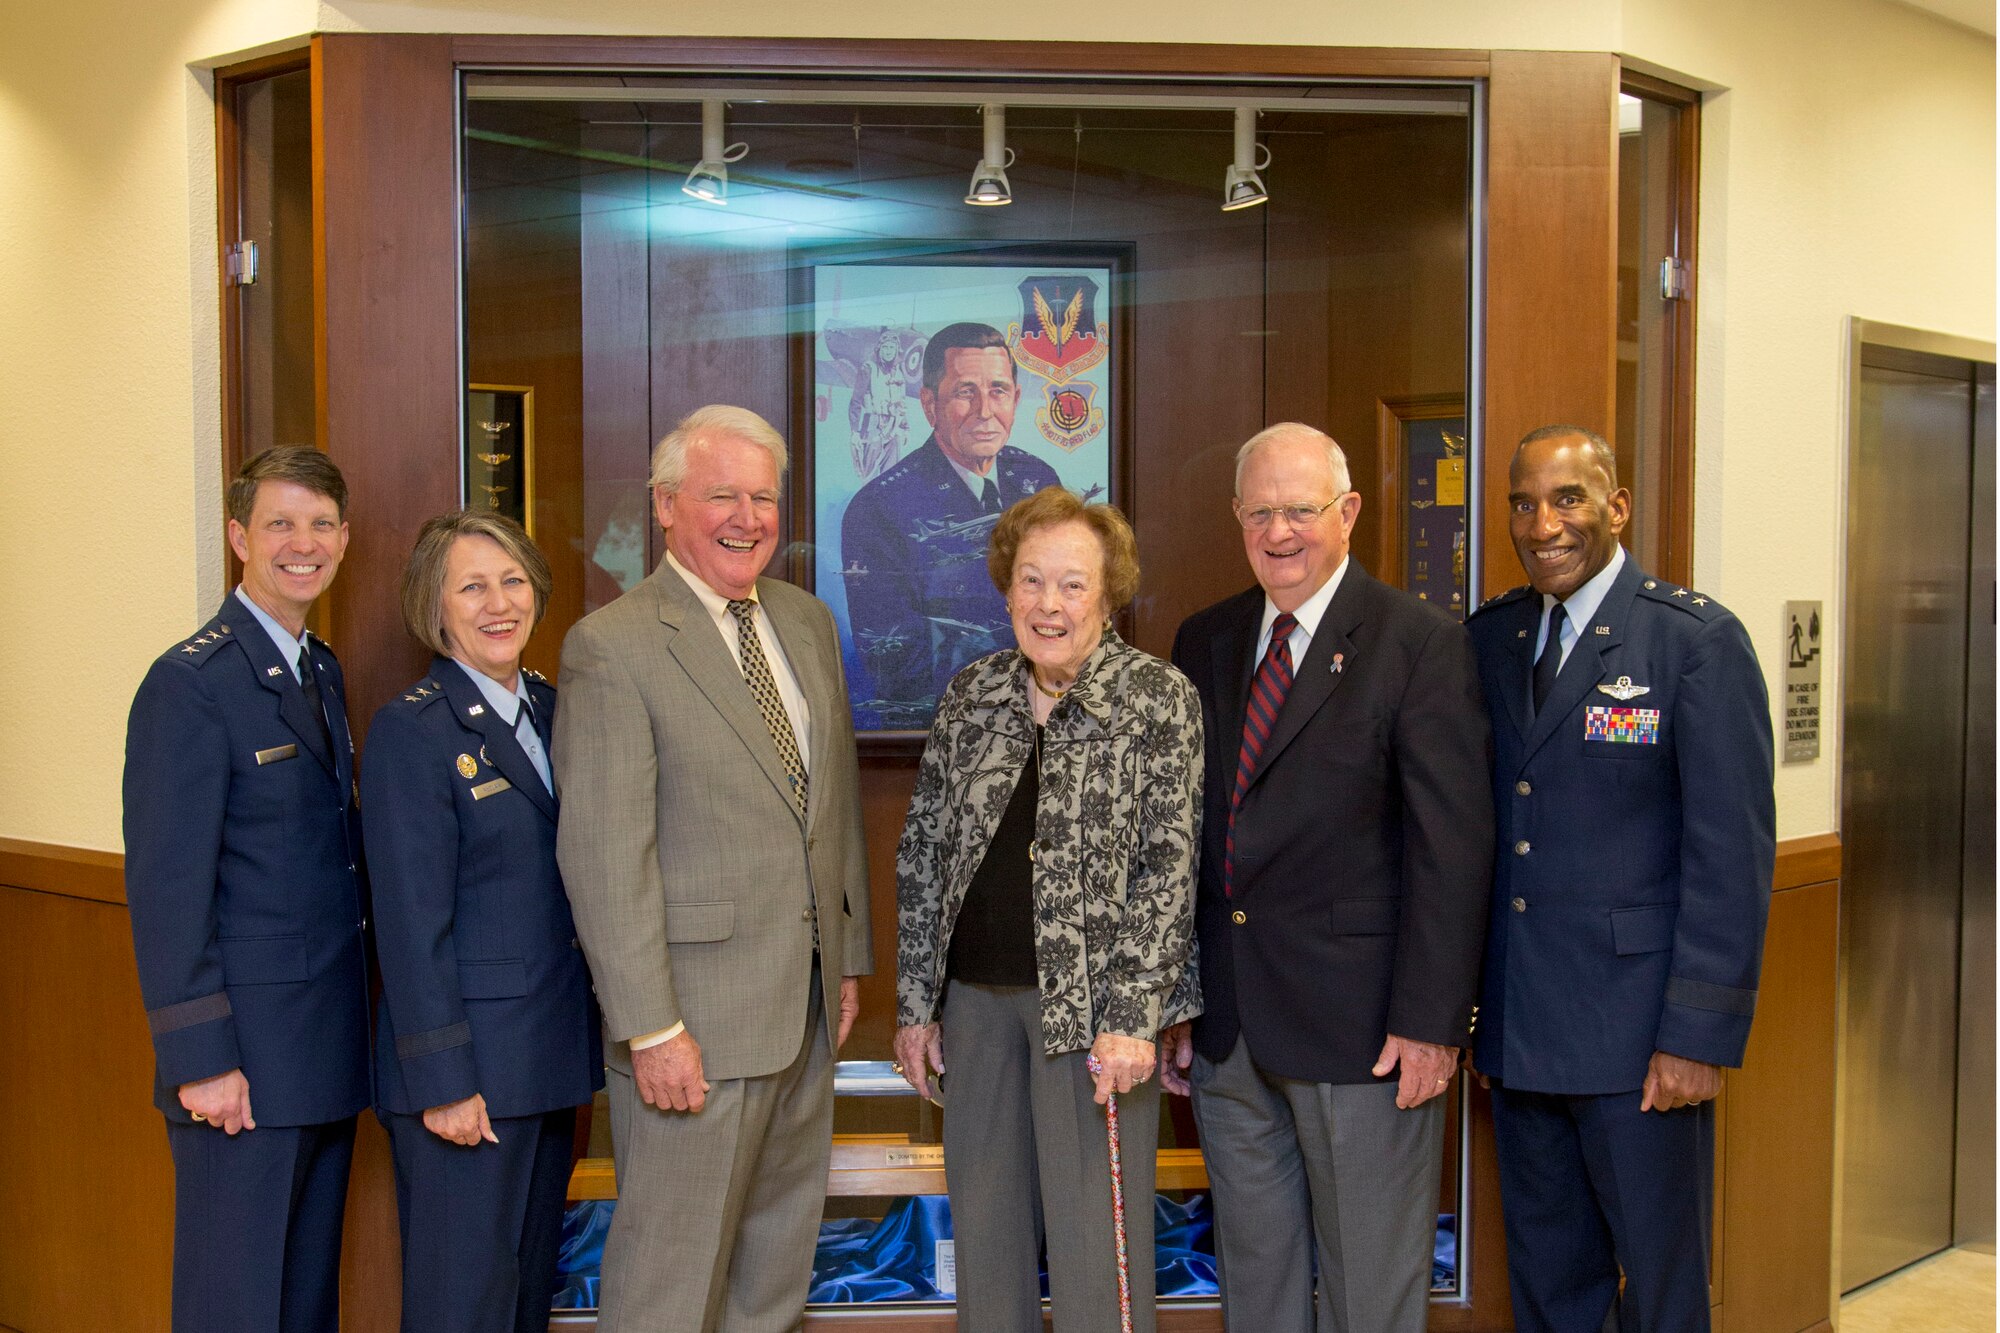 Air Force Personnel Center commander Maj. Gen. A.J. Stewart (far right) poses with Mrs. Kelly Dixon (center), wife of the late Gen. Robert J. Dixon, during a tour of the Dixon Heritage Hall Exhibit. Distinguished guests touring the exhibit also included (left to right) Lt. Gen. Darrell D. Jones, Deputy Chief of Staff for Manpower, Personnel and Services, Headquarters U.S. Air Force, Washington, D.C.; and retired former Air Force Personnel Center commanders Maj. Gen. K.C. McClain, Gen. Billy Boles, and Lt. Gen. Michael D. McGinty. (Air Force photo/Joshua Rodriguez)